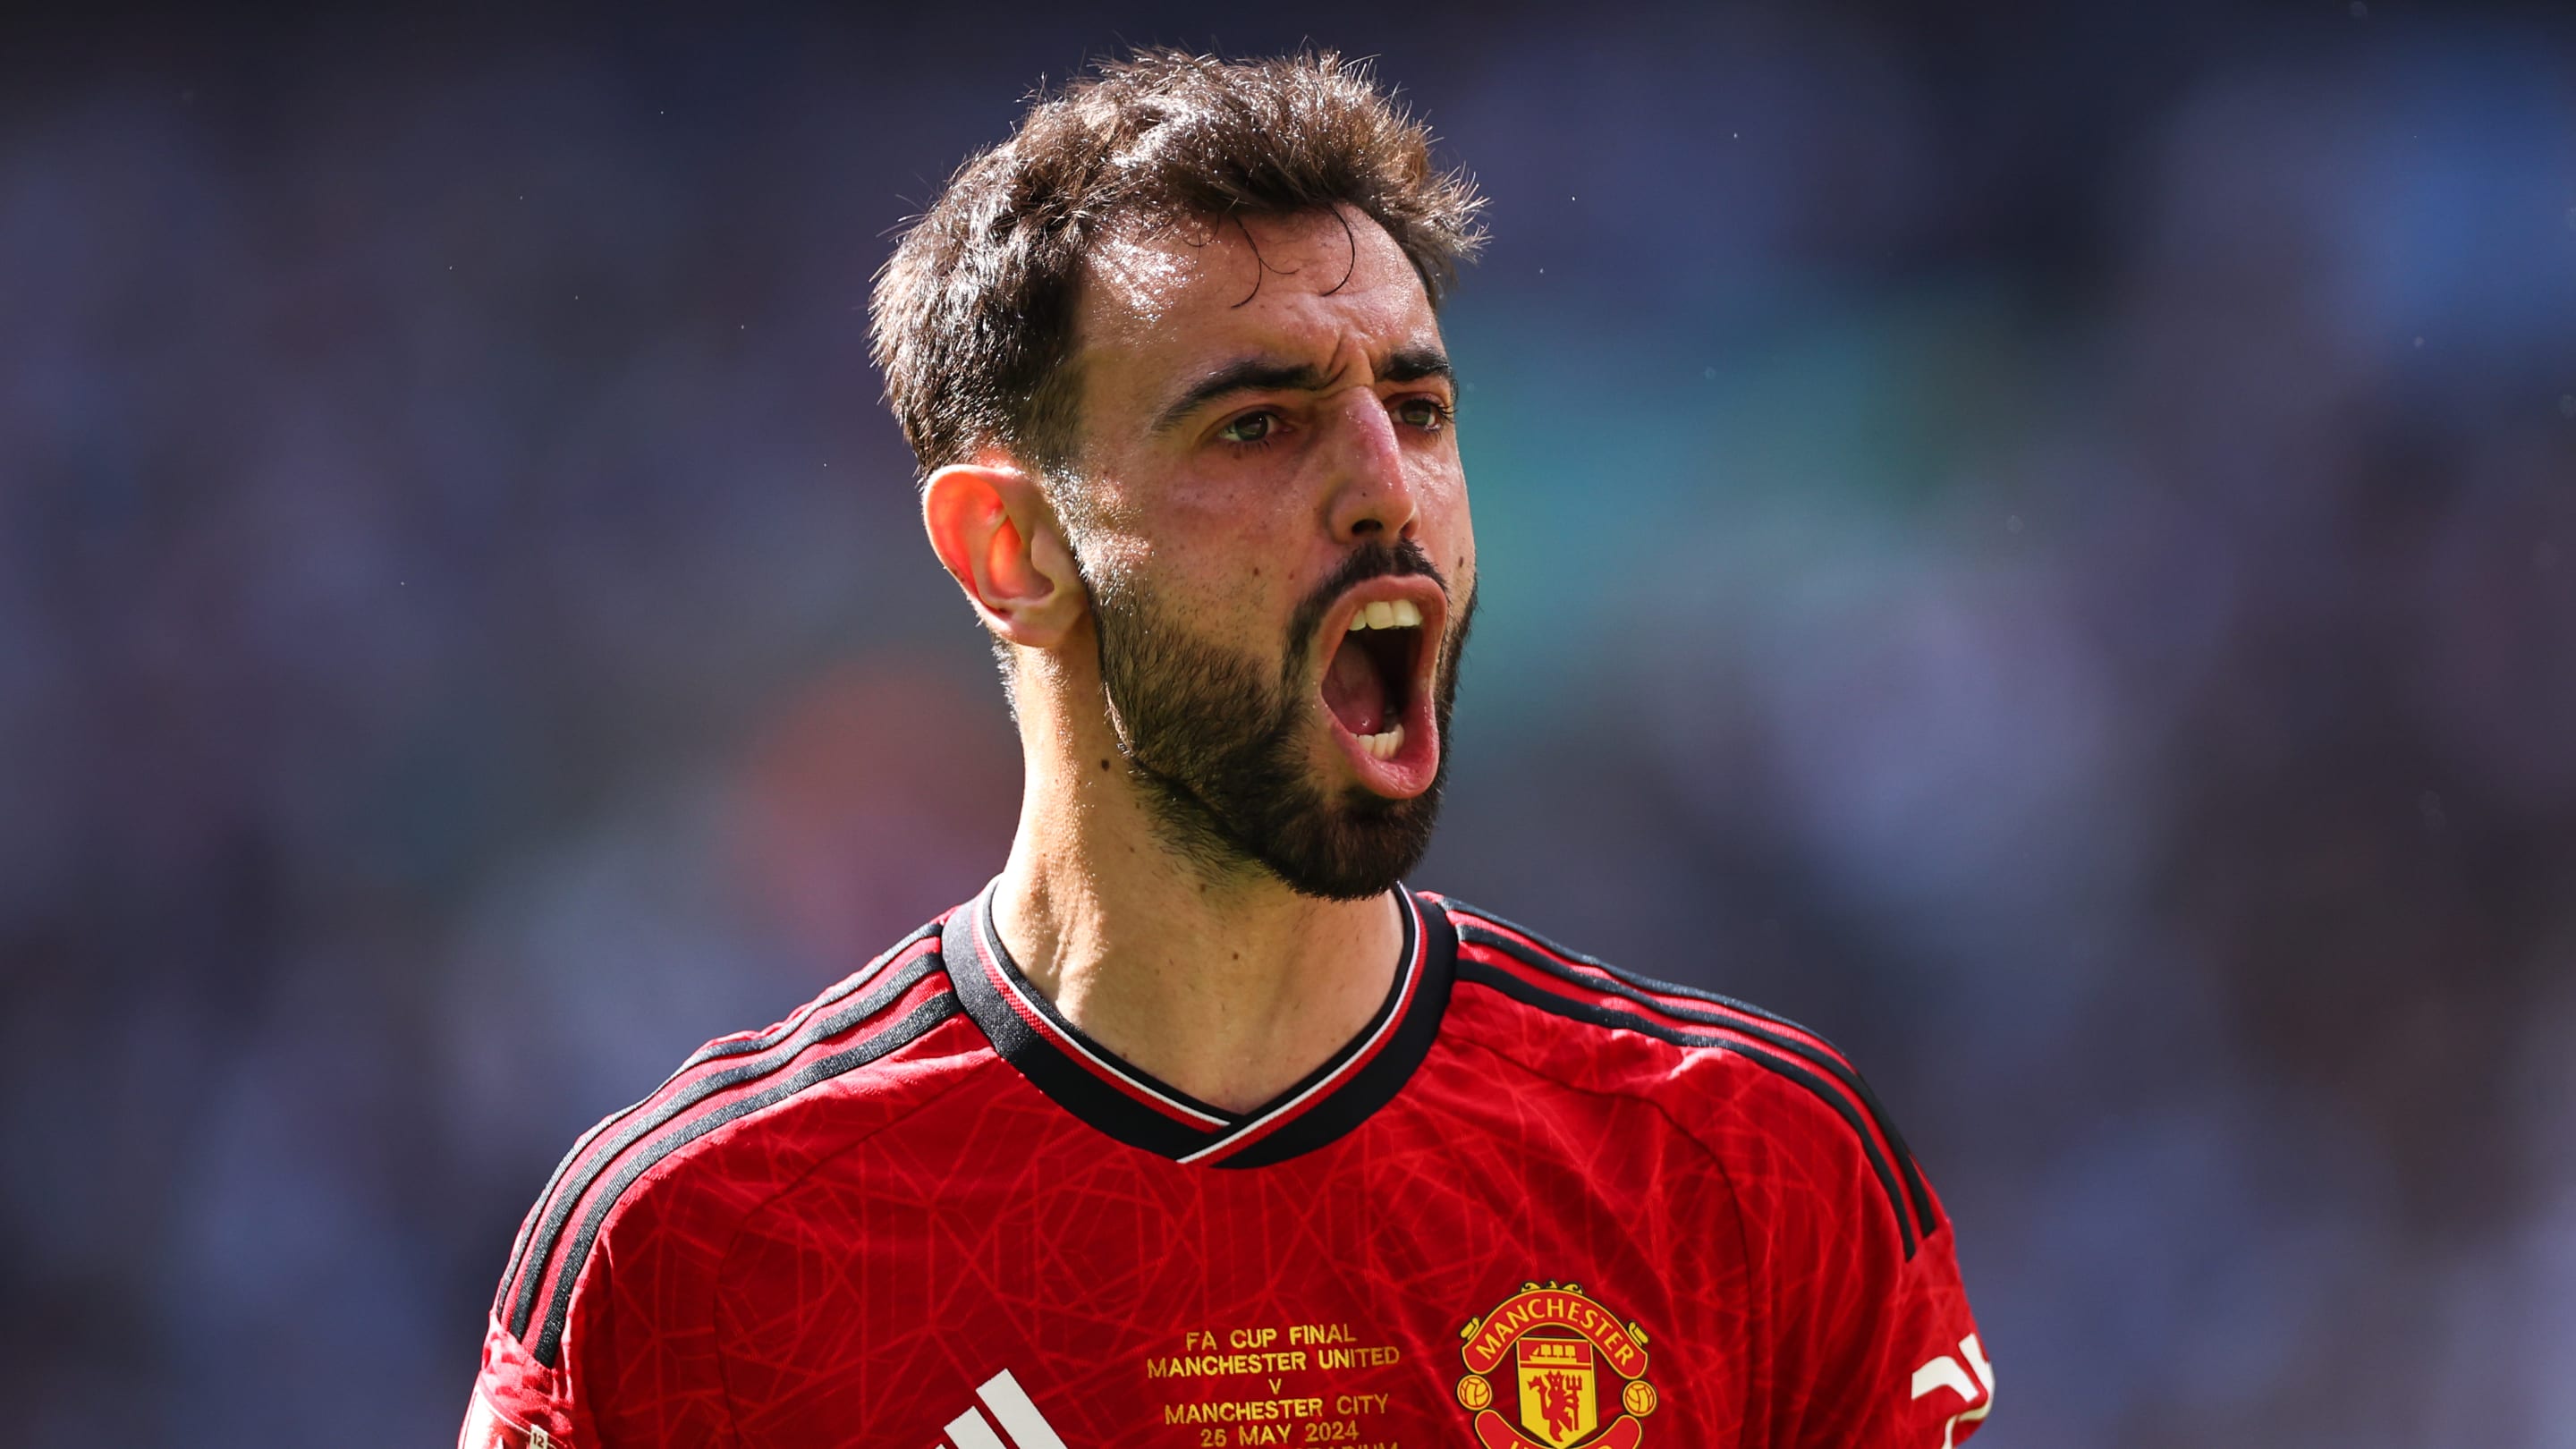 Man Utd make decision on Bruno Fernandes contract - report